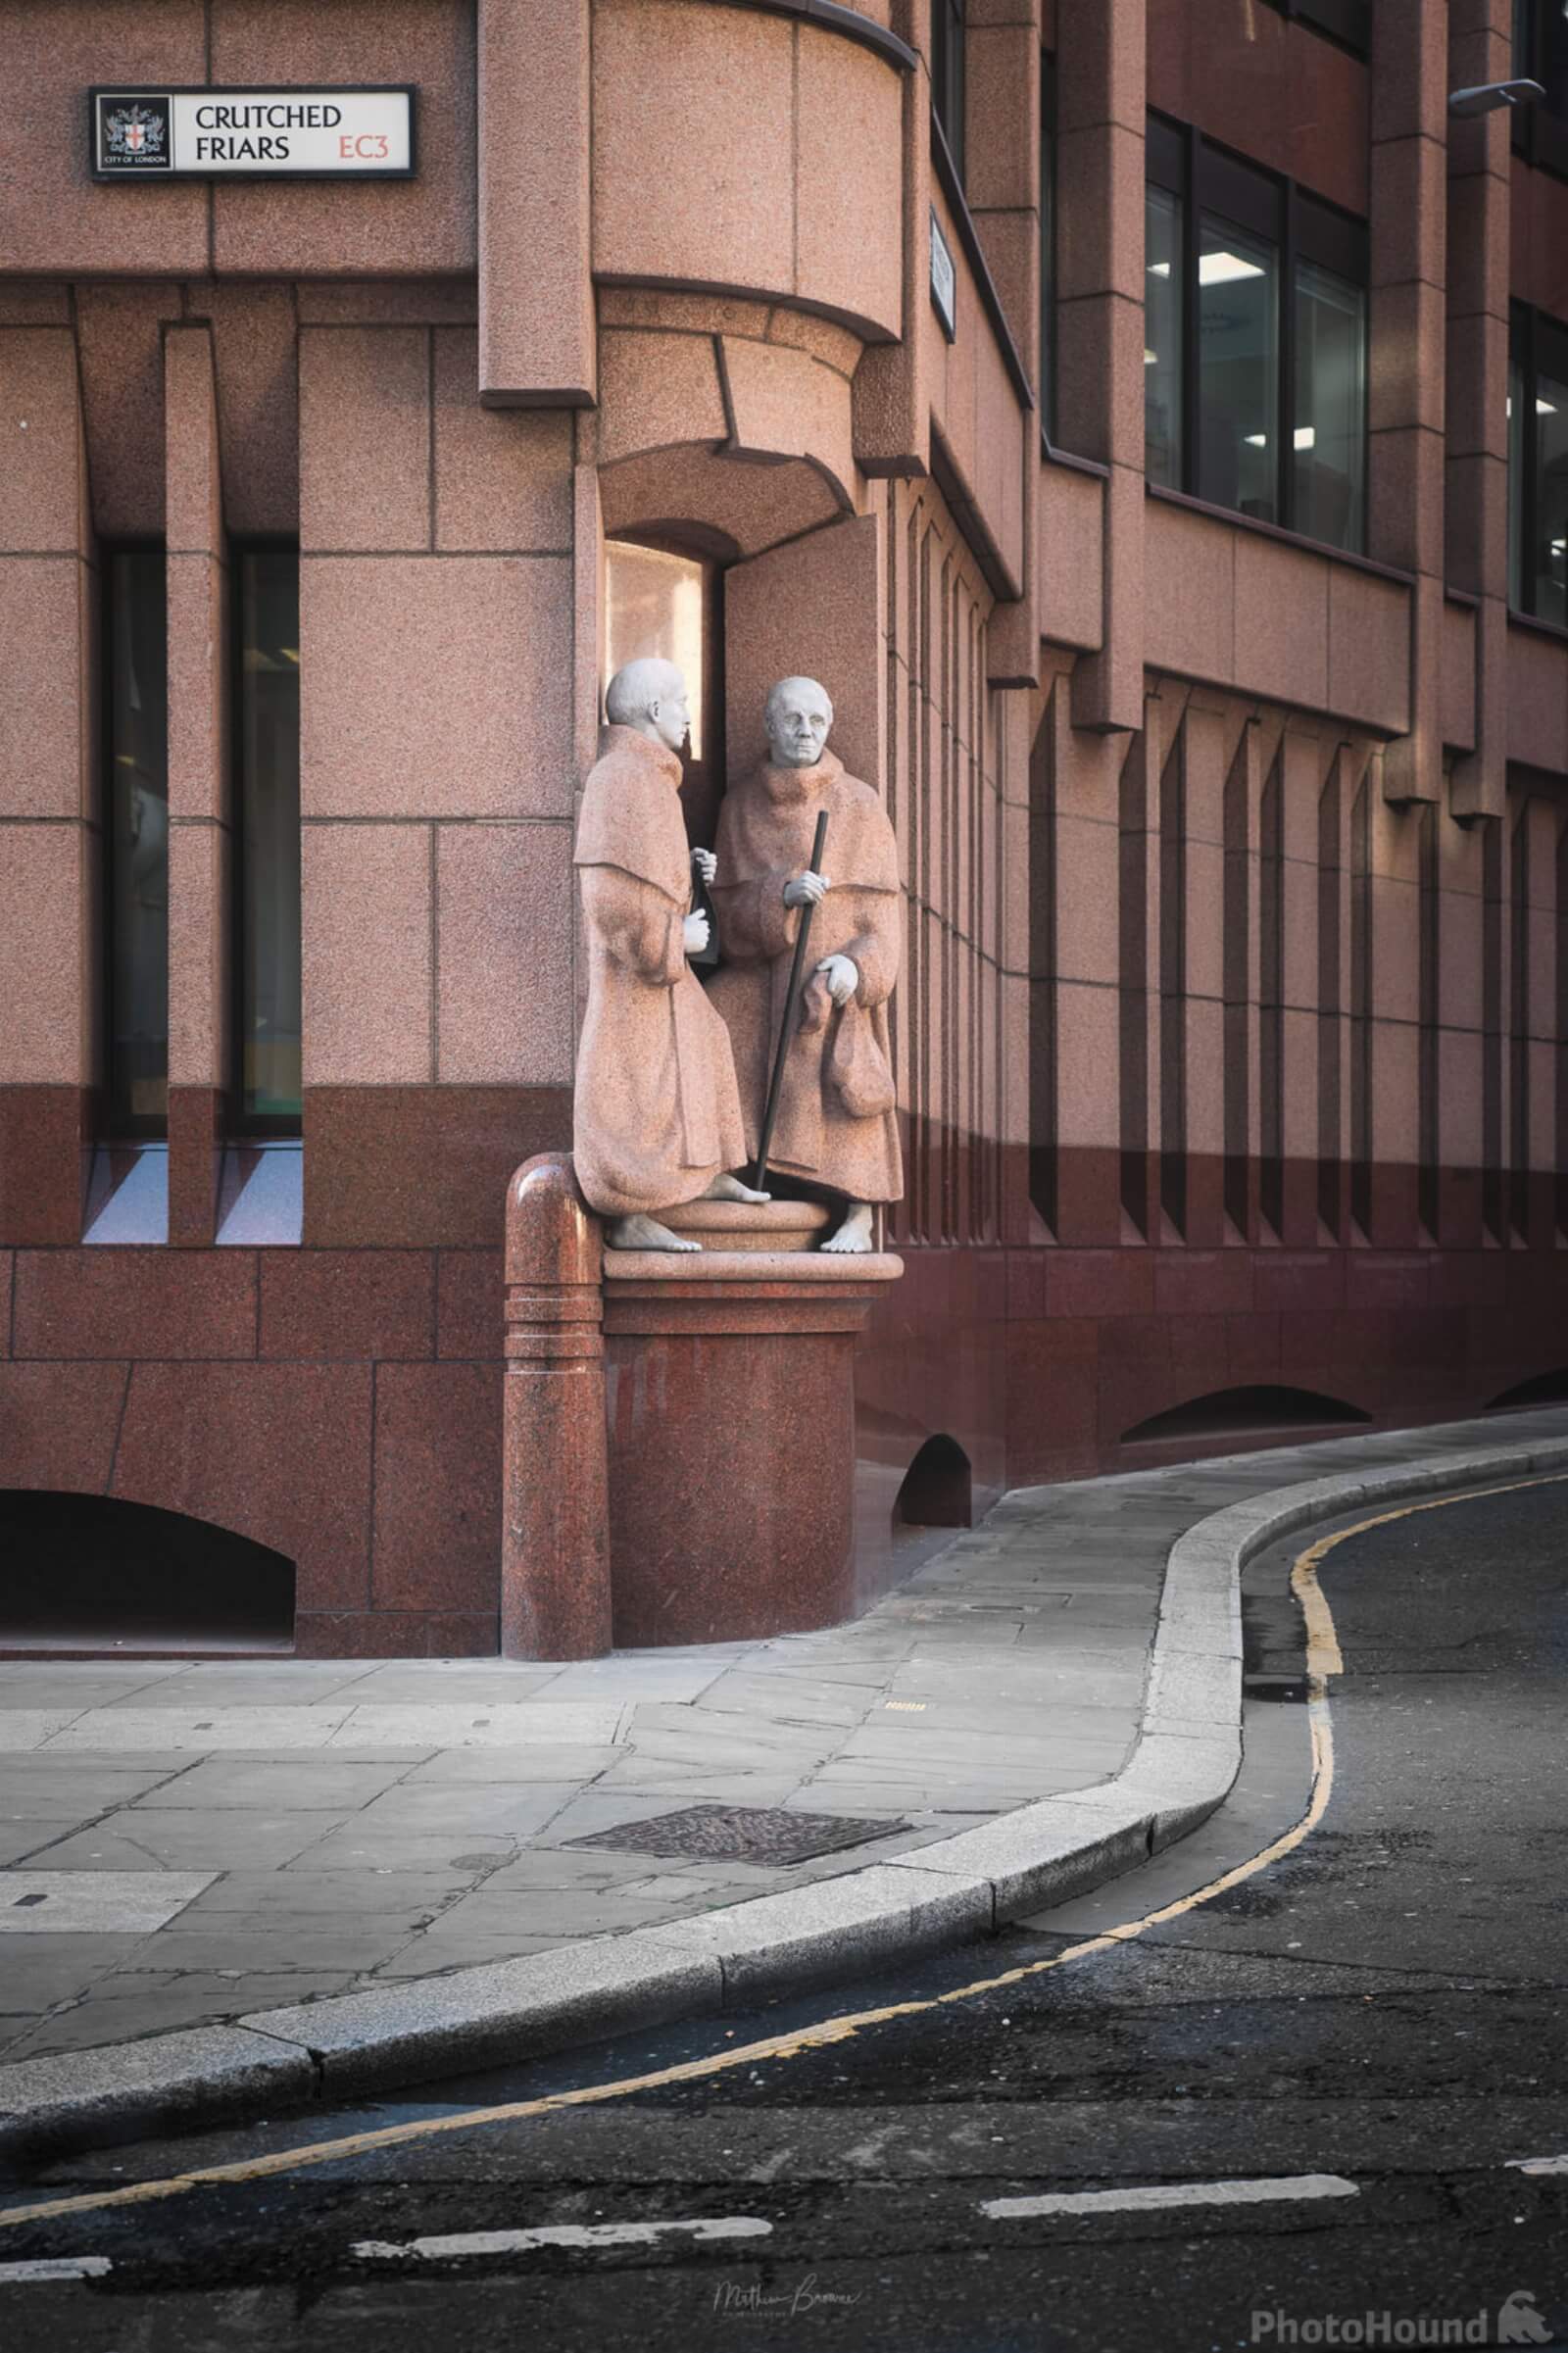 Image of Crutched Friars by Mathew Browne